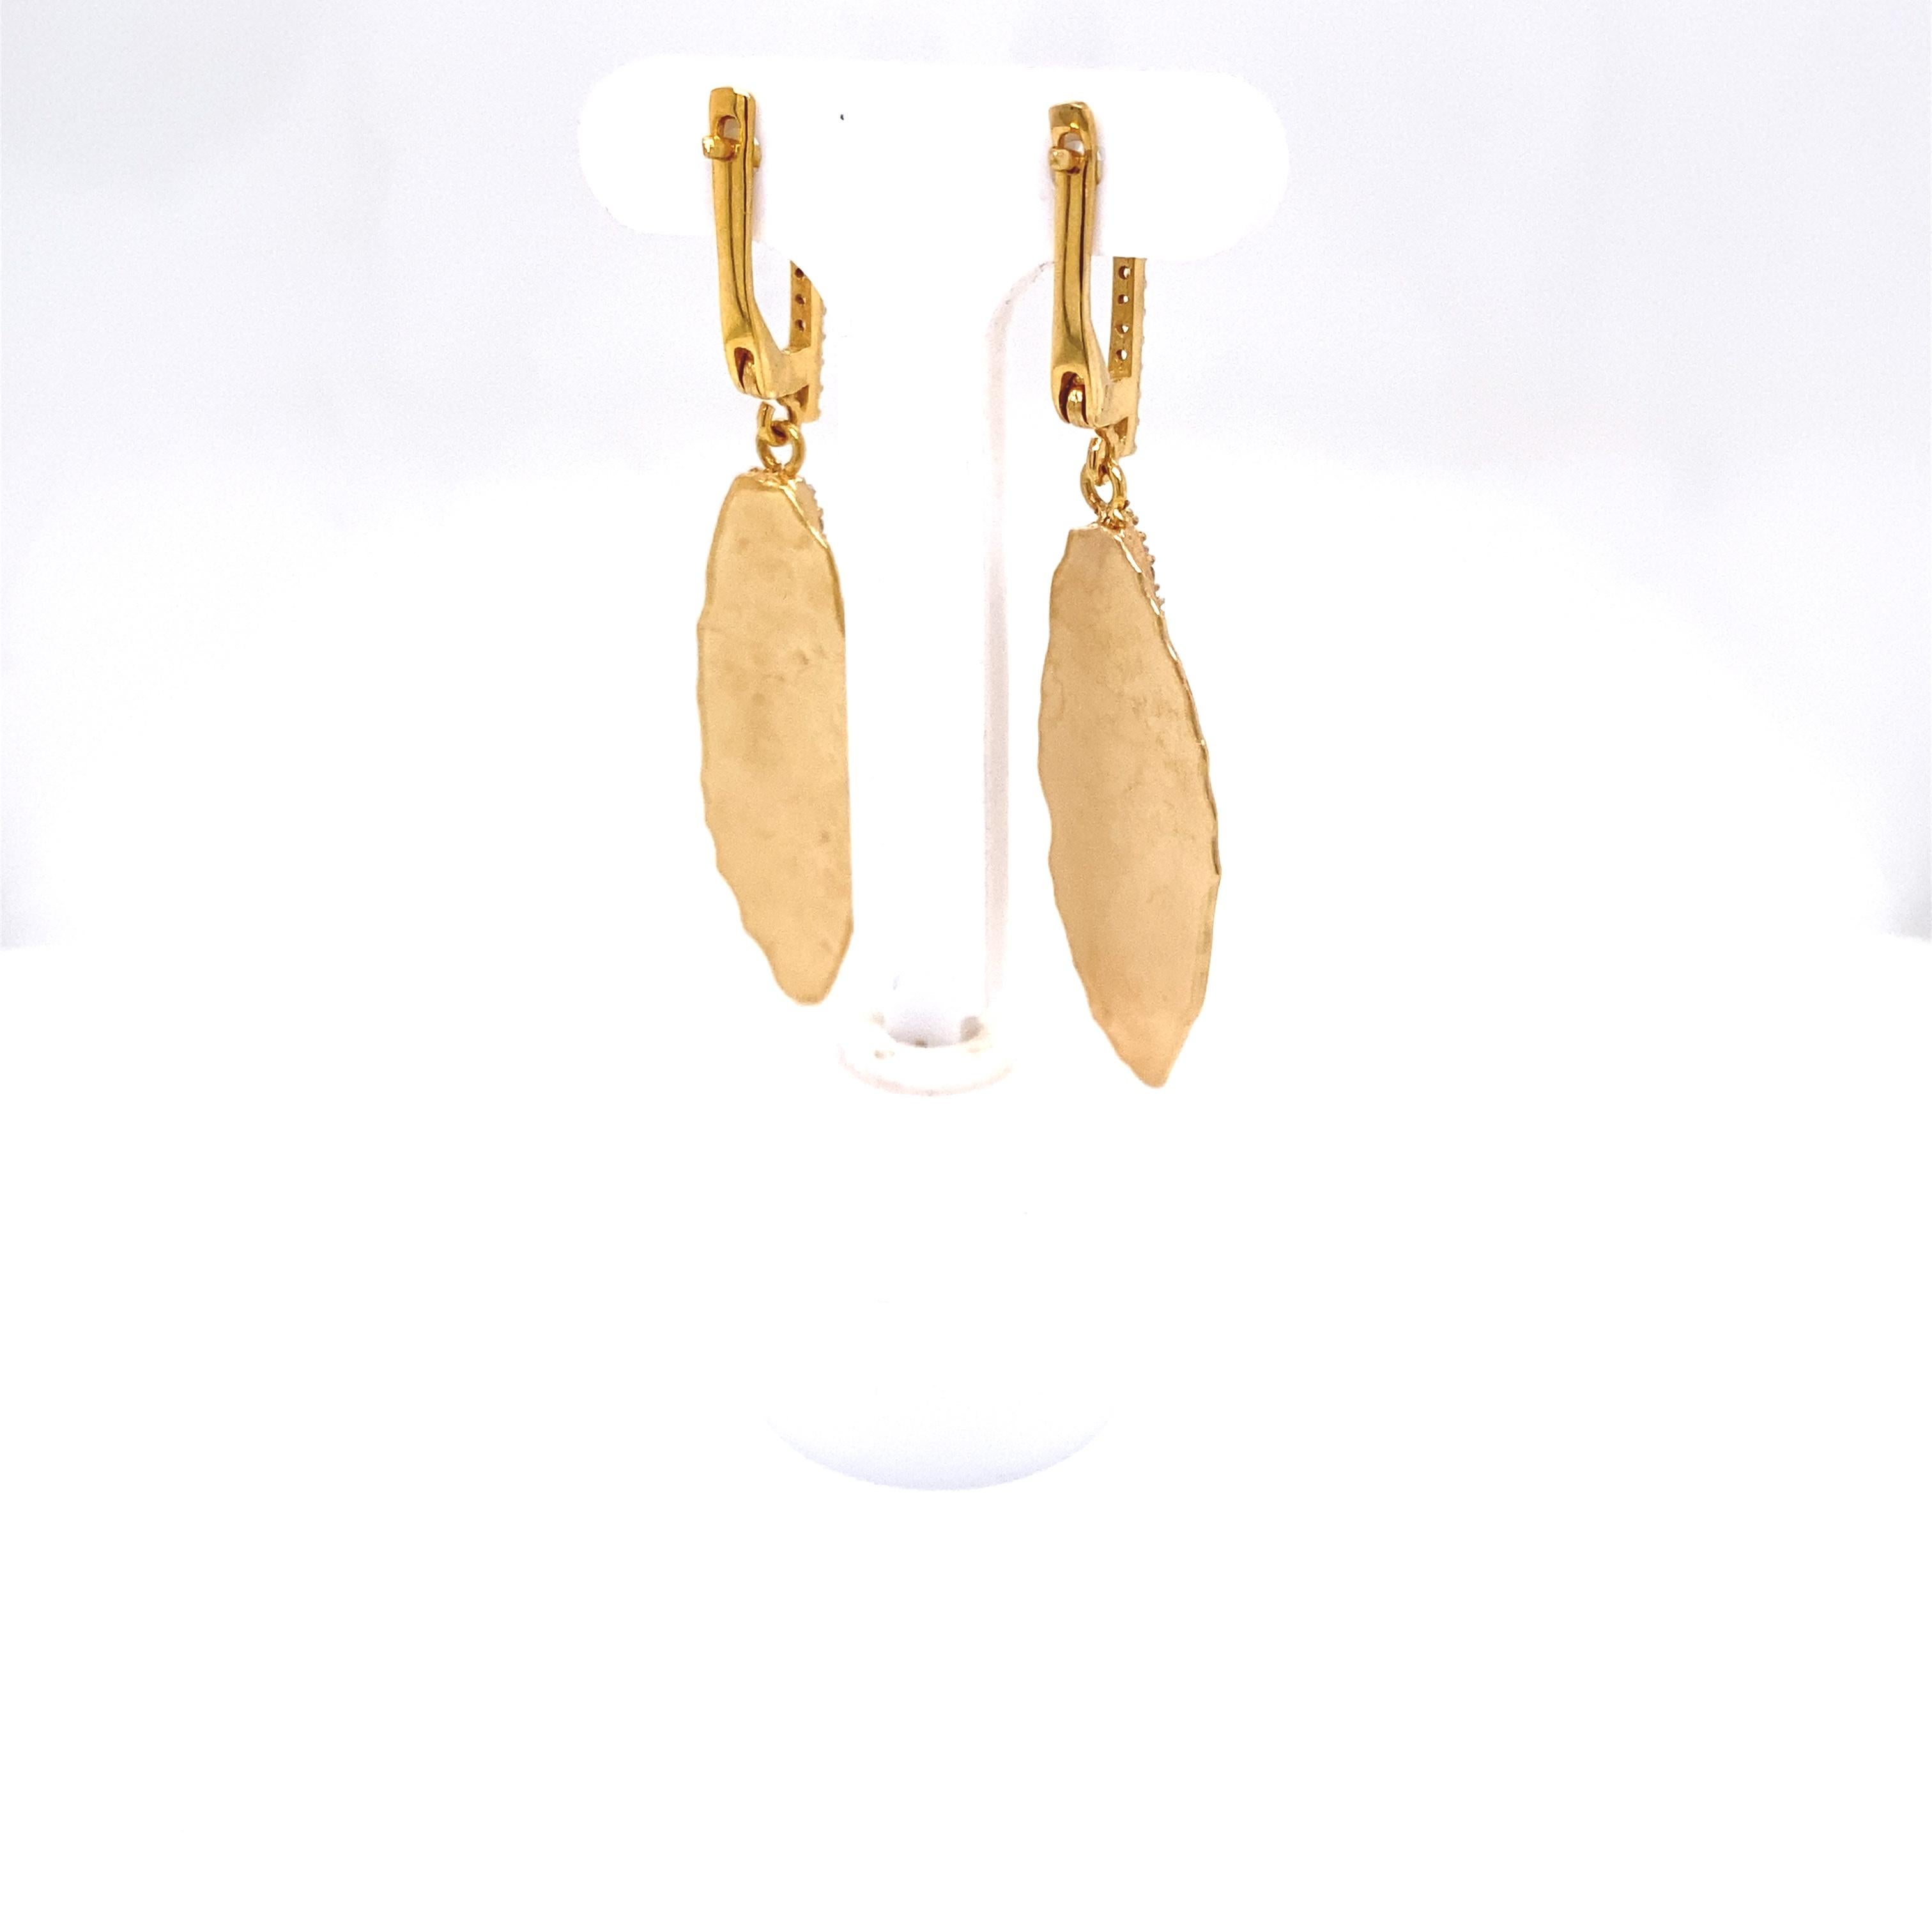 14 Karat Yellow Gold Hand-Crafted Matte and Hammer-Finished Dangling Leaf Earrings, Accented with 0.35 Carat Diamonds, Set on a Leverback Finding.
